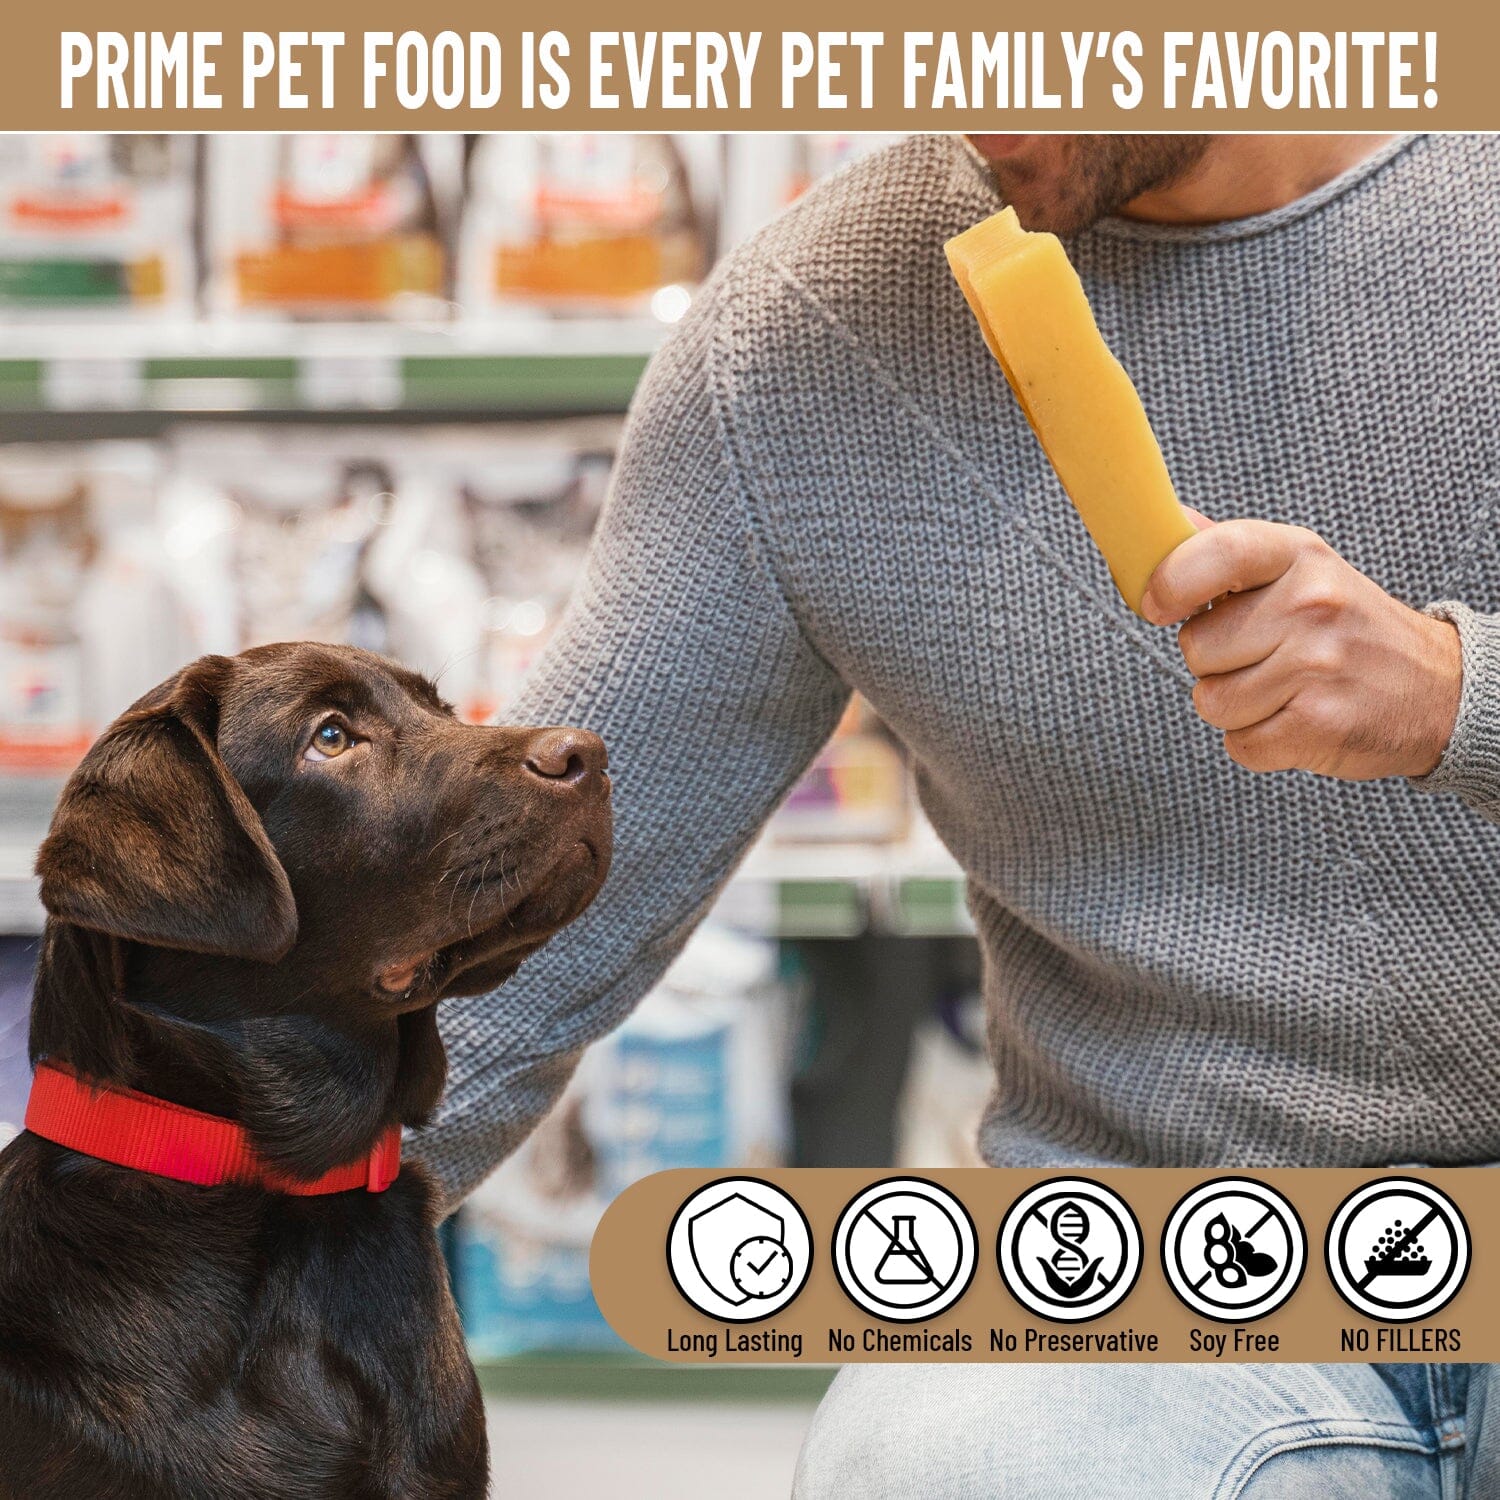 The Essential Guide to Dog Food: Why Prime Pet Food Yak Cheese is the Best Choice